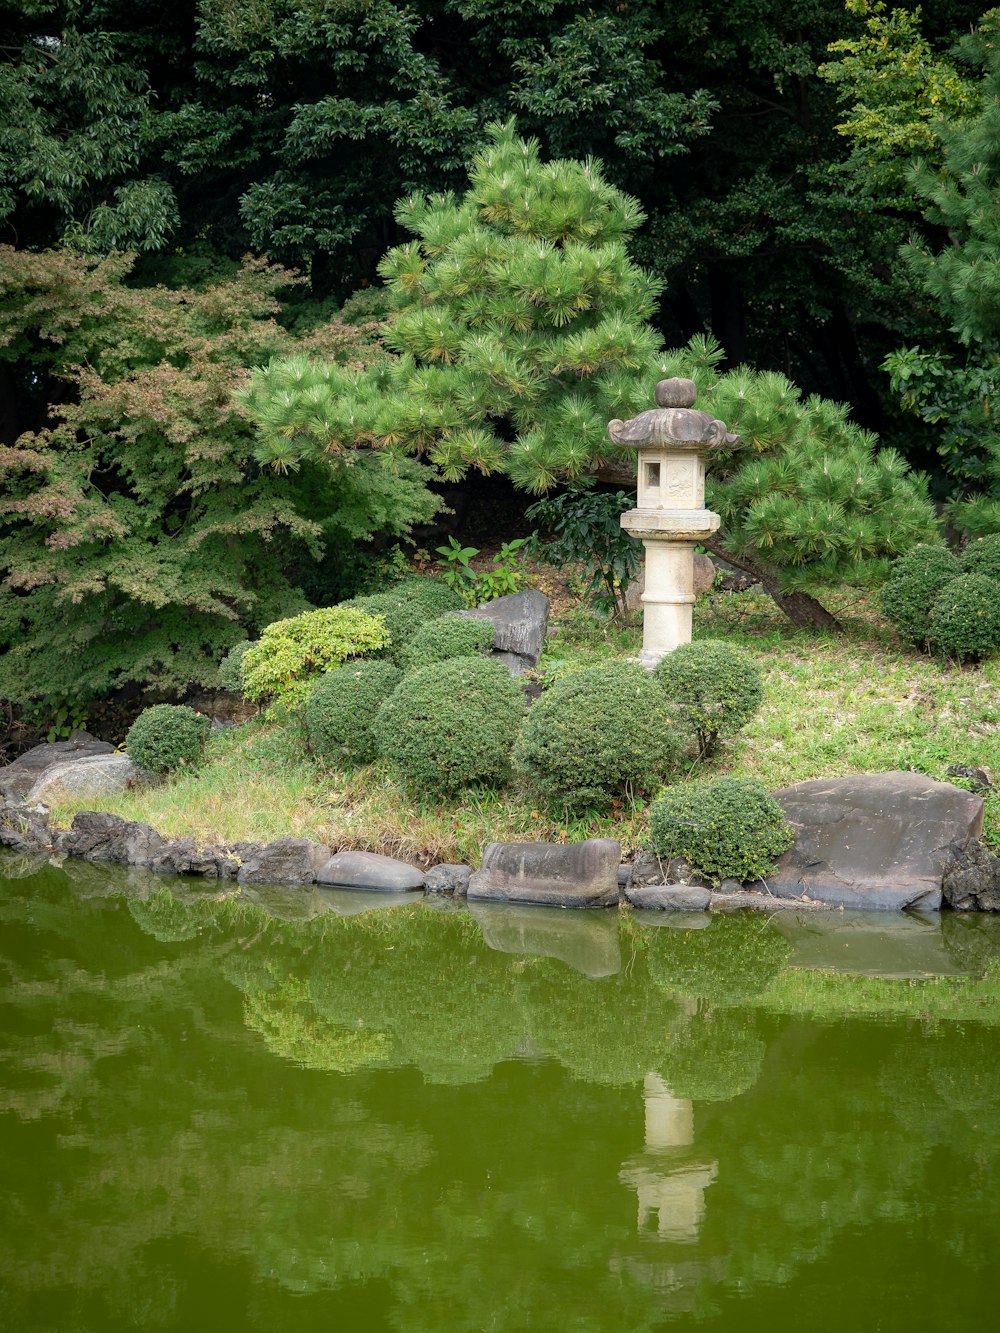 a pond with rocks and a stone lantern in the middle of it